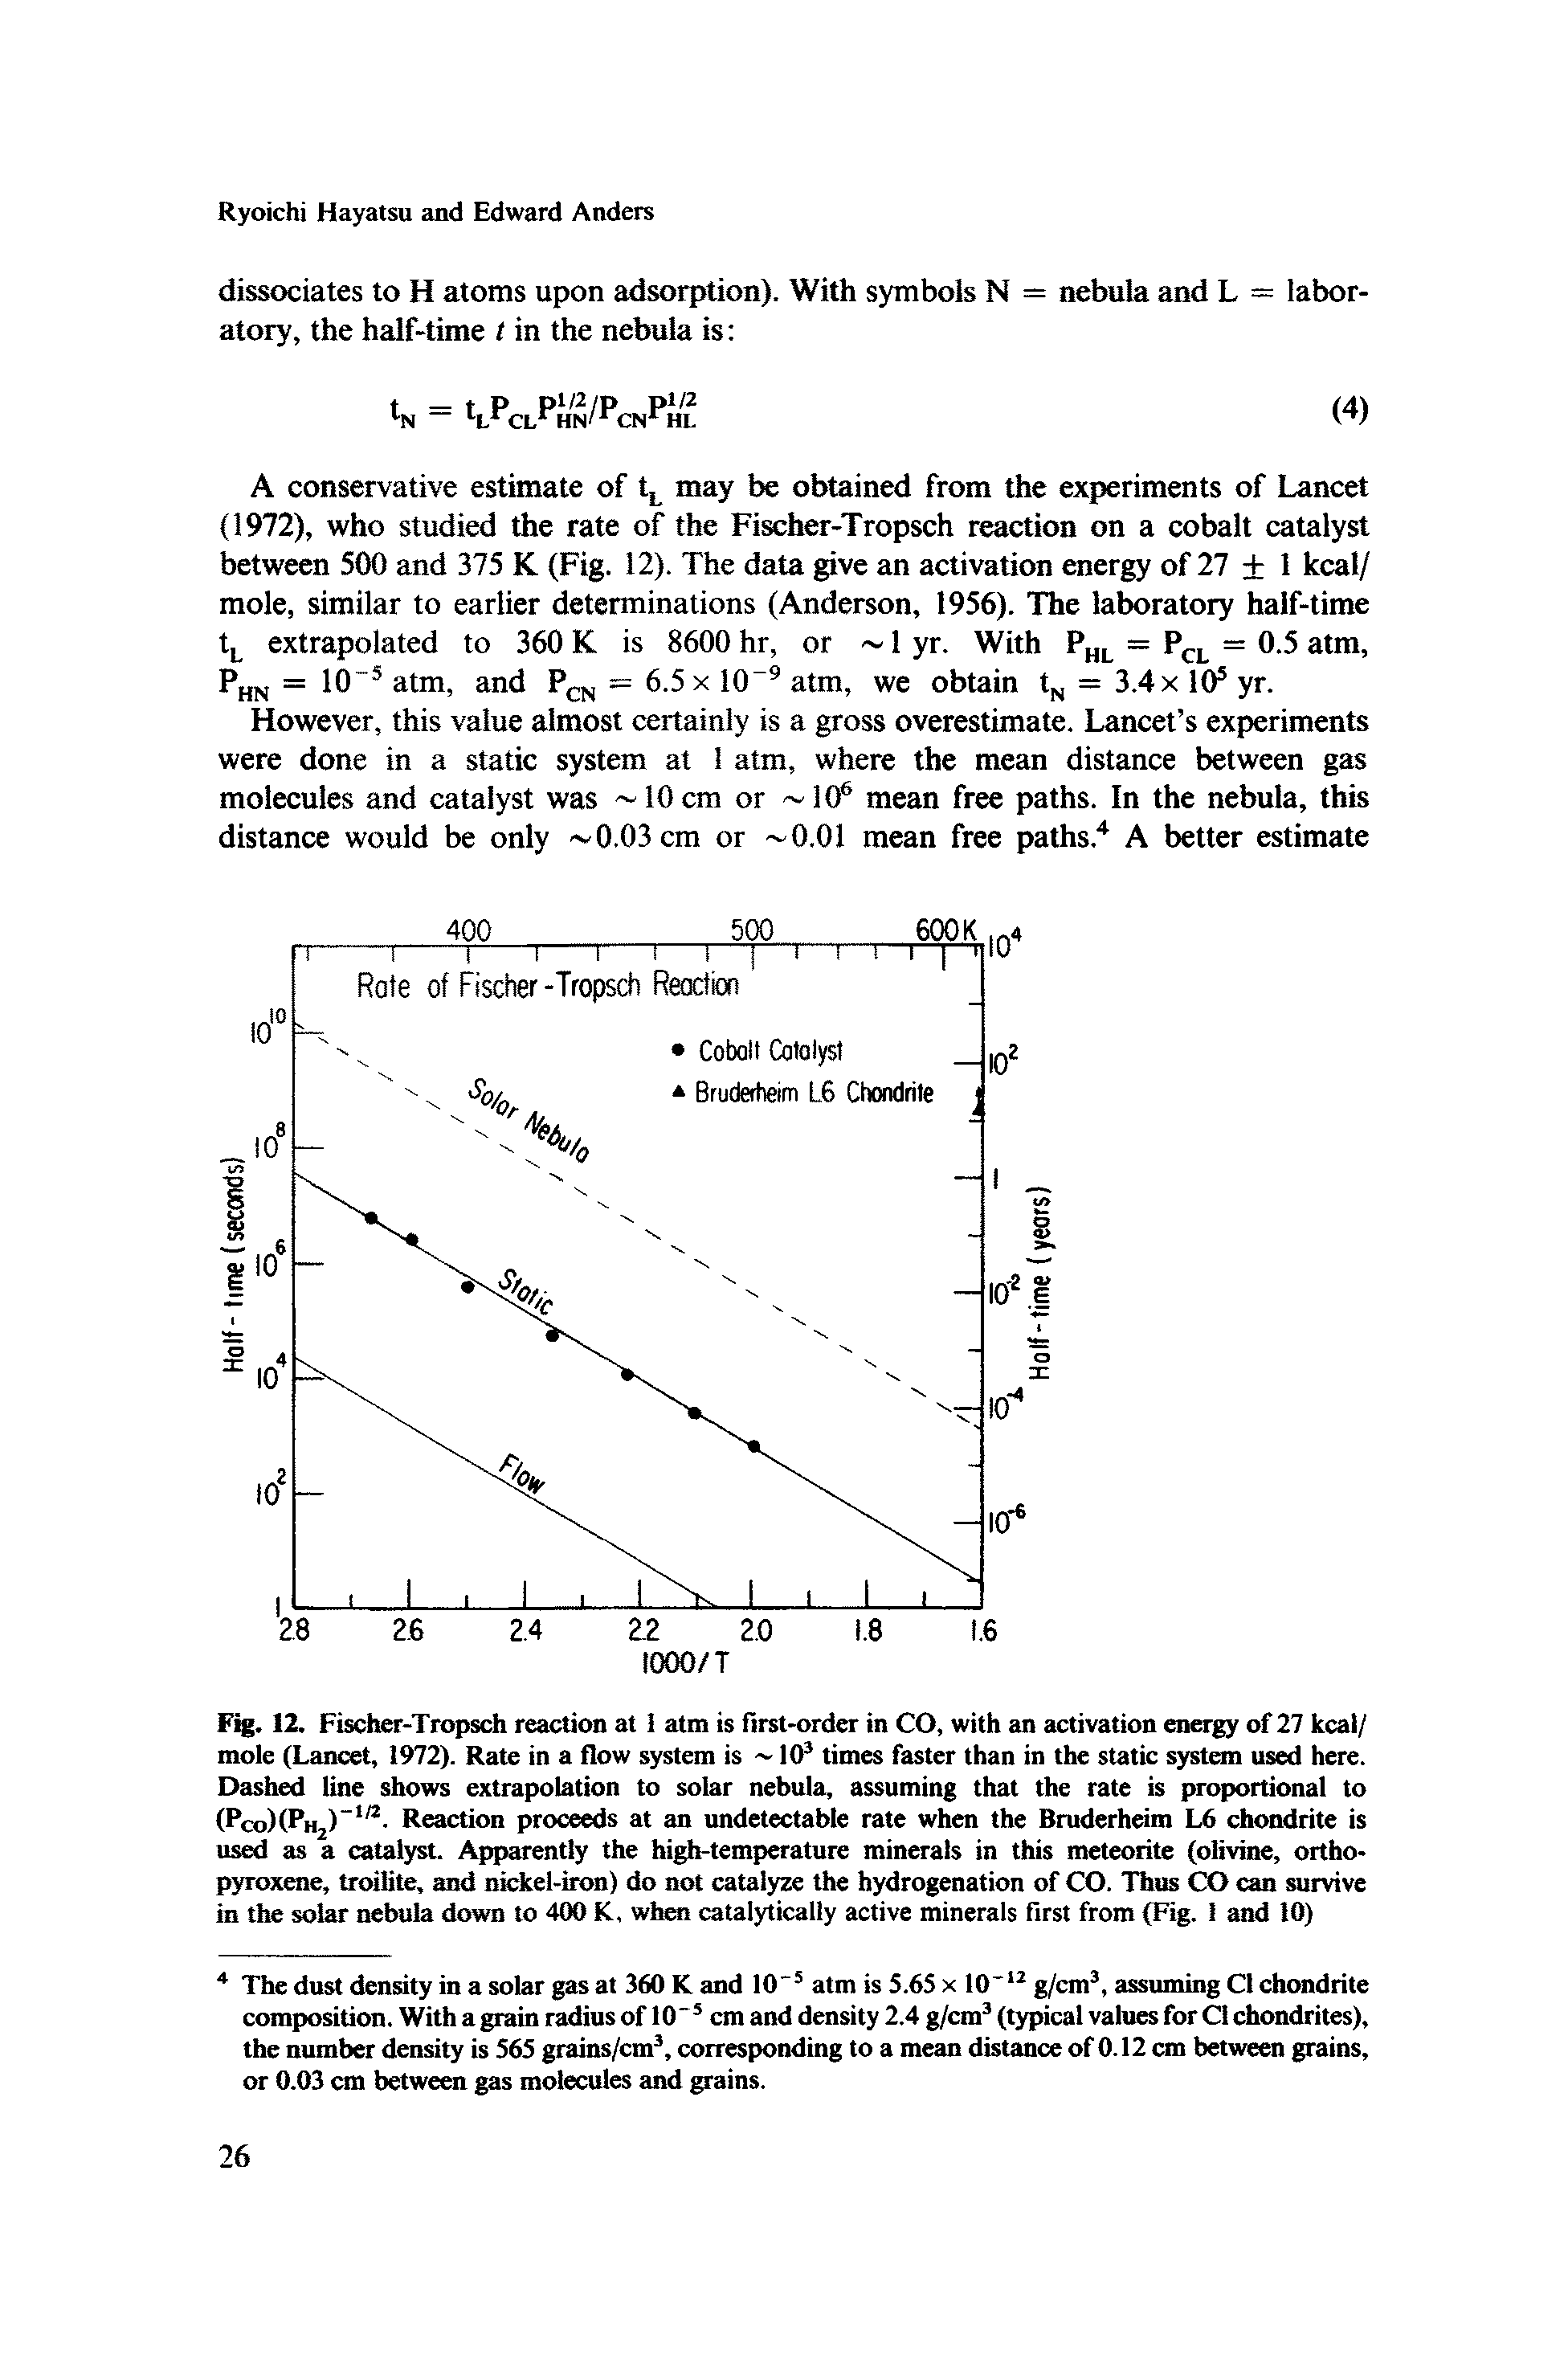 Fig. 12. Fischer-Tropsch reaction at 1 atm is first-order in CO, with an activation energy of 27 kcal/ mole (Lancet, 1972). Rate in a flow system is 10 times faster than in the static system used here. Dashed line shows extrapolation to solar nebula, assuming that the rate is proportional to (PcoIIPhj) . Reaction proceeds at an undetectable rate when the Bruderheim L6 chondrite is used as a catalyst. Apparently the high-temperature minerals in this meteorite (olivine, orthopyroxene, troilite, and nickel-iron) do not catalyze the hydrogenation of CO. Thus CO can survive in the solar nebula down to 400 K, when catalytically active minerals first from (Fig. 1 and 10)...